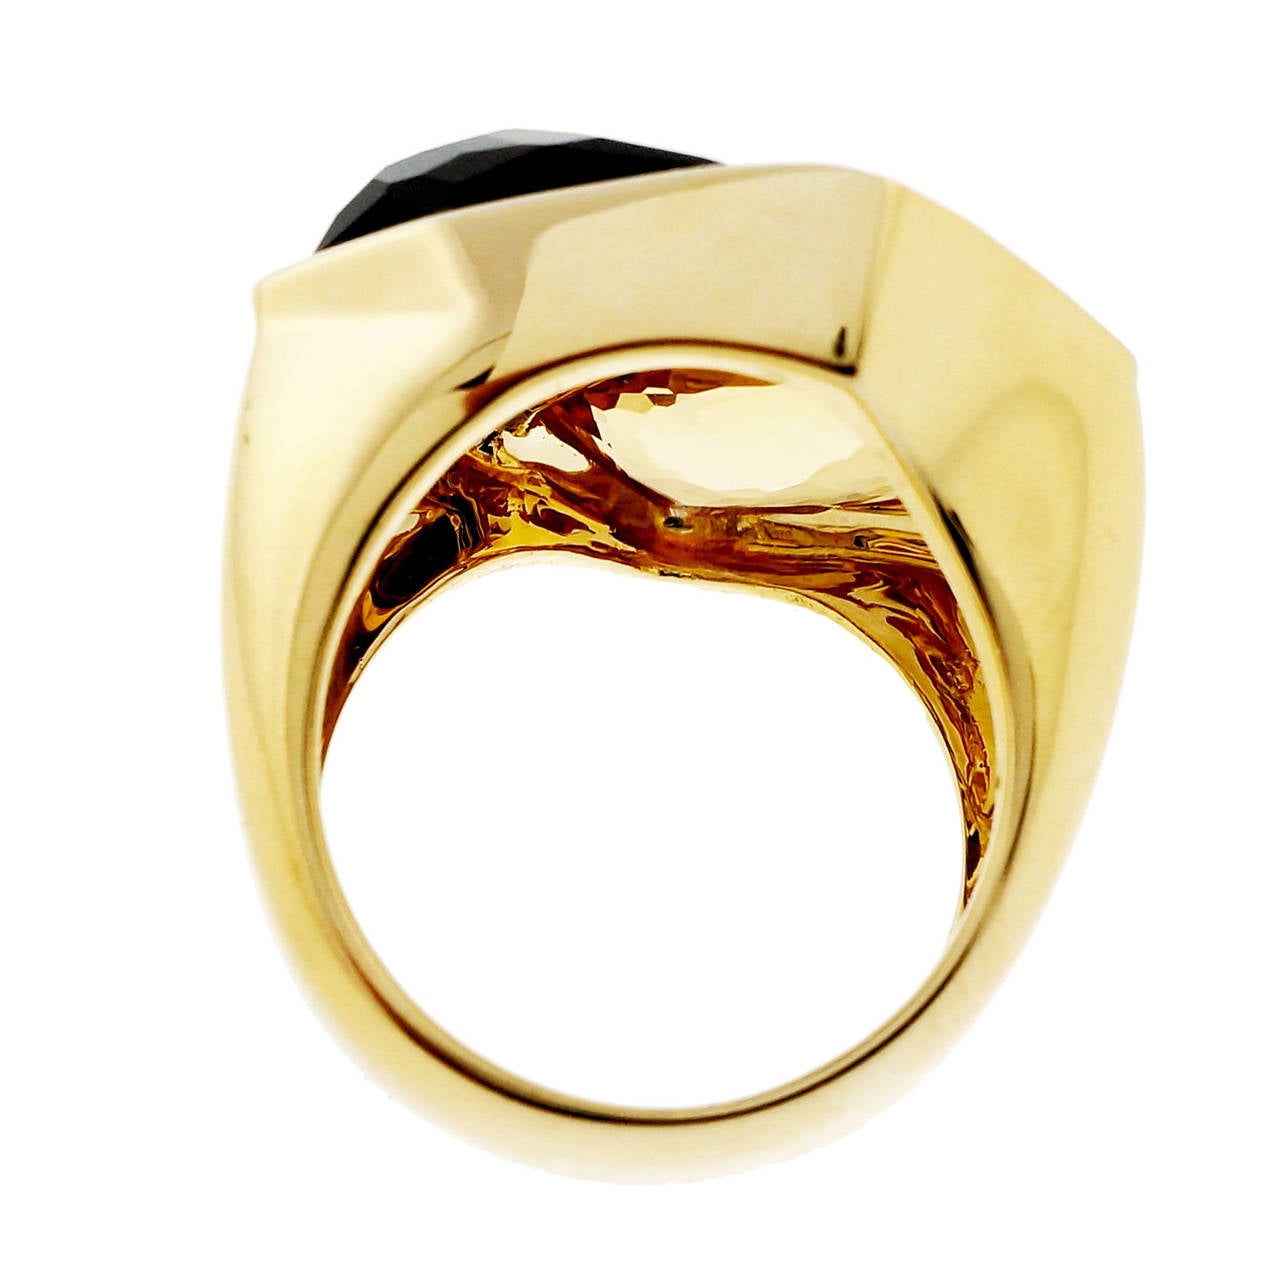 Fantasy cut bright yellow Citrine and rich smoky Quartz cocktail ring. Set in a solid 18k yellow gold setting by Allia. 

1 Fantasy cut yellow Citrine, approx. total weight 7.85cts, VS, 20.82 x 11.28 x 6.05mm
1 Fantasy cut brown smoky Quartz,